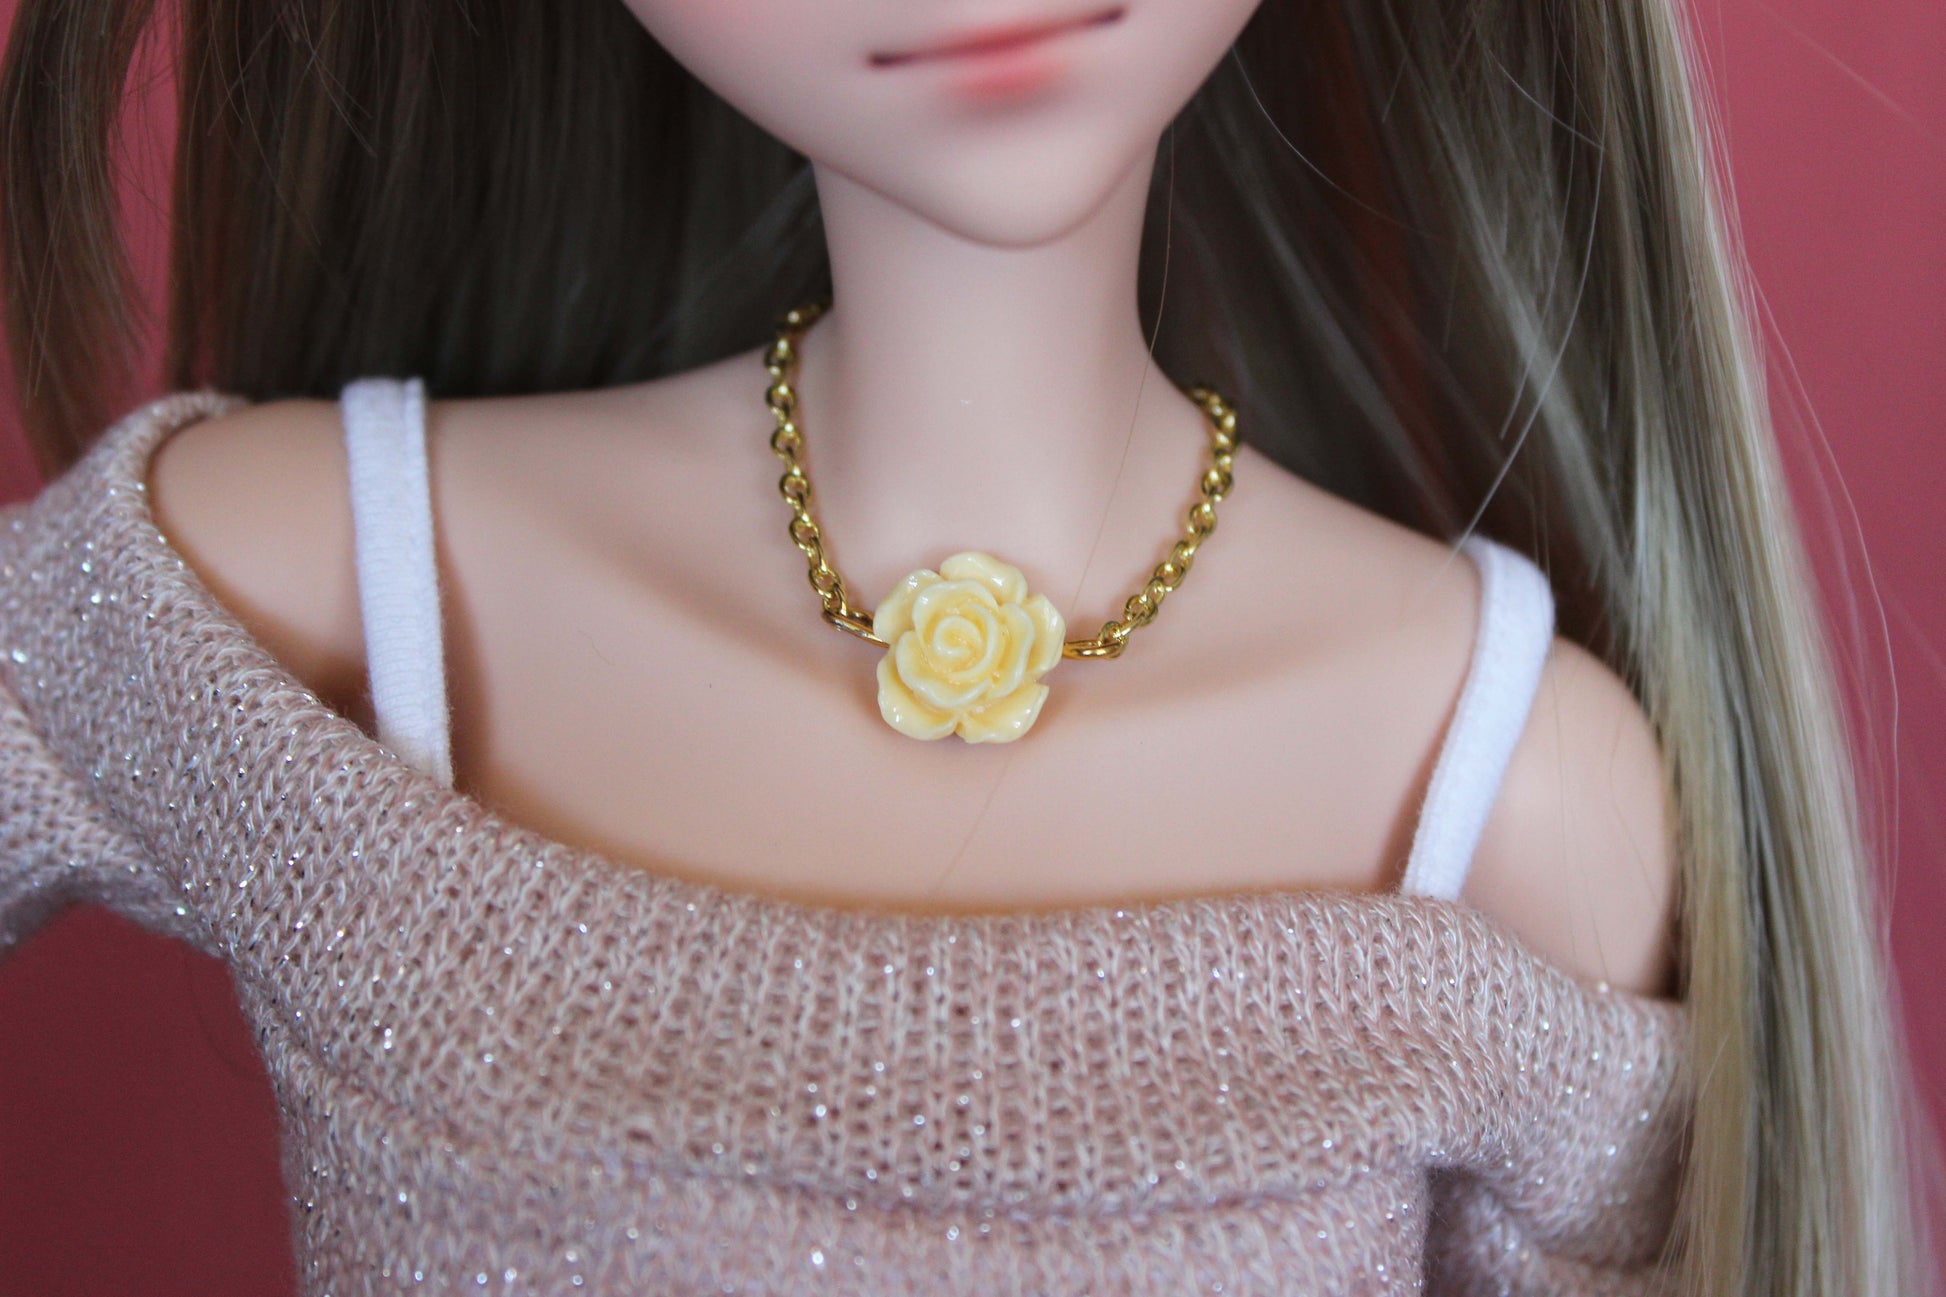 Rose Necklace for Smart Dolls - The Doll Fairy